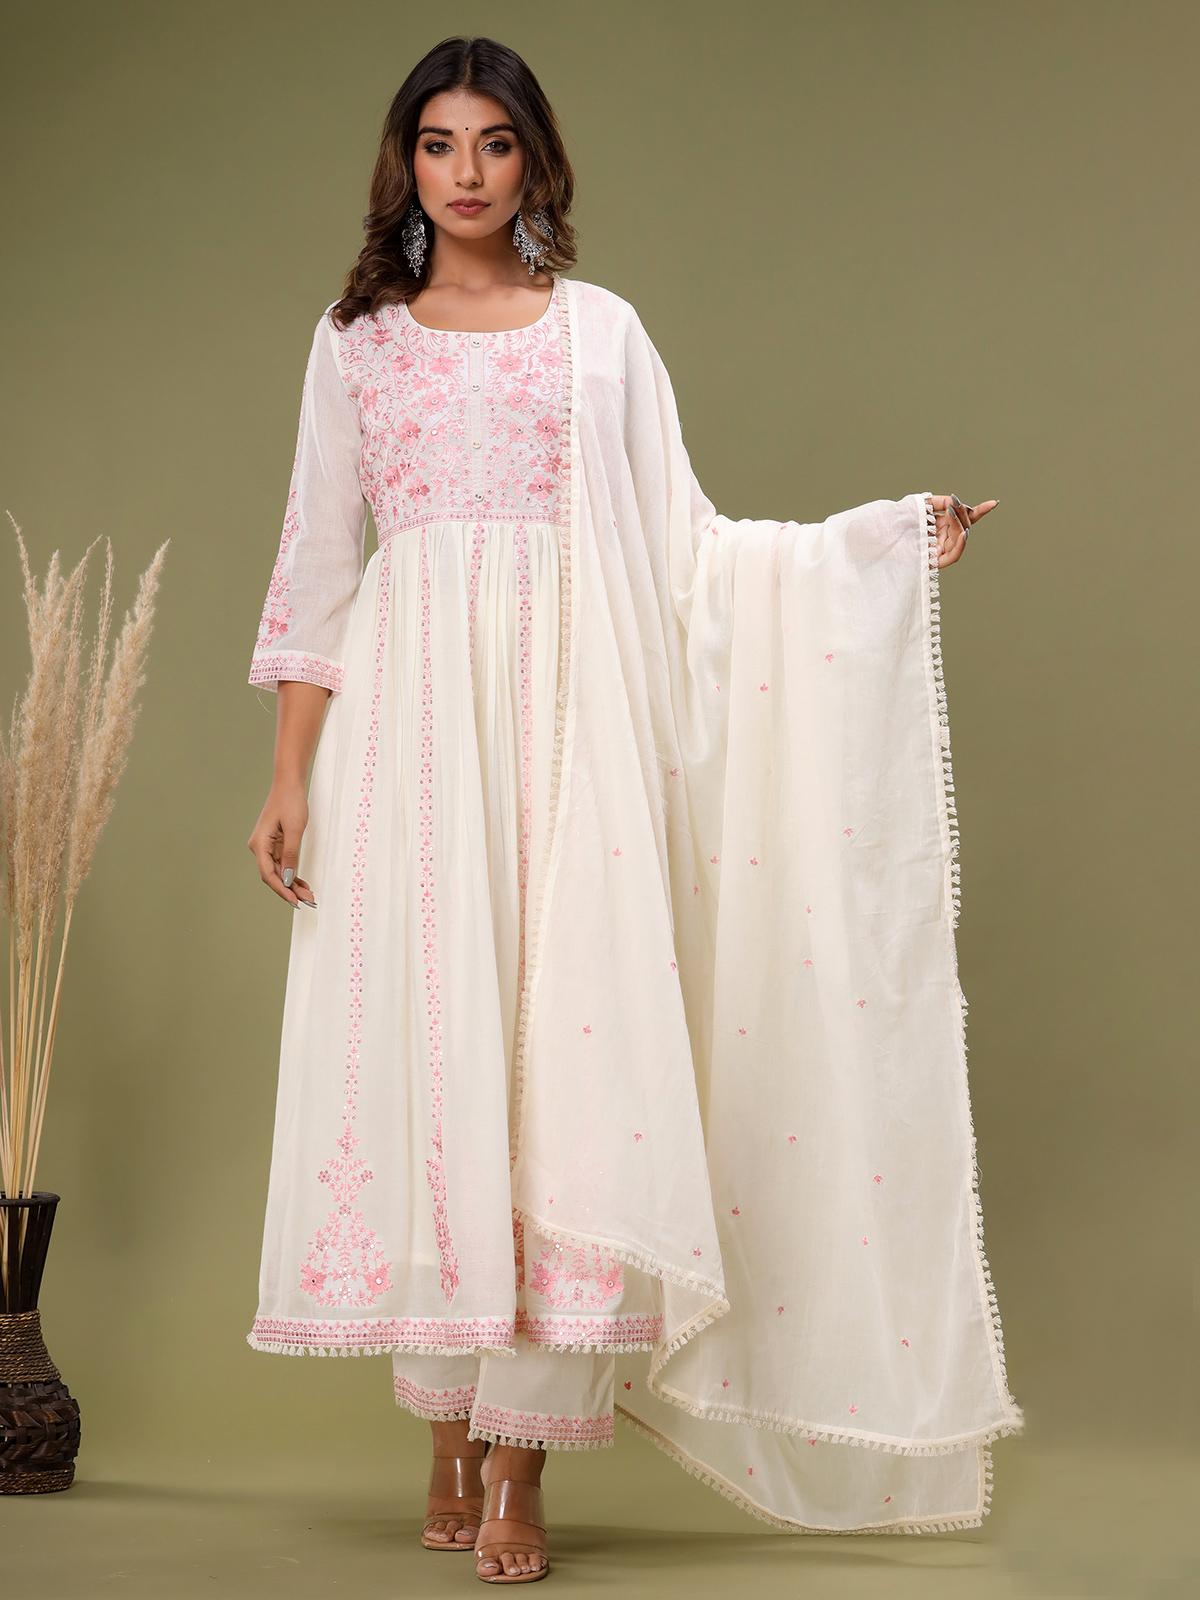 LG 1802 WHITE COLOUR MASLIN WITH EMBROIDERY WORK EID SPECIAL KURTI SET BUY  FOR WOMEN AT BEST RATE WHOLESALE DEALER SURAT